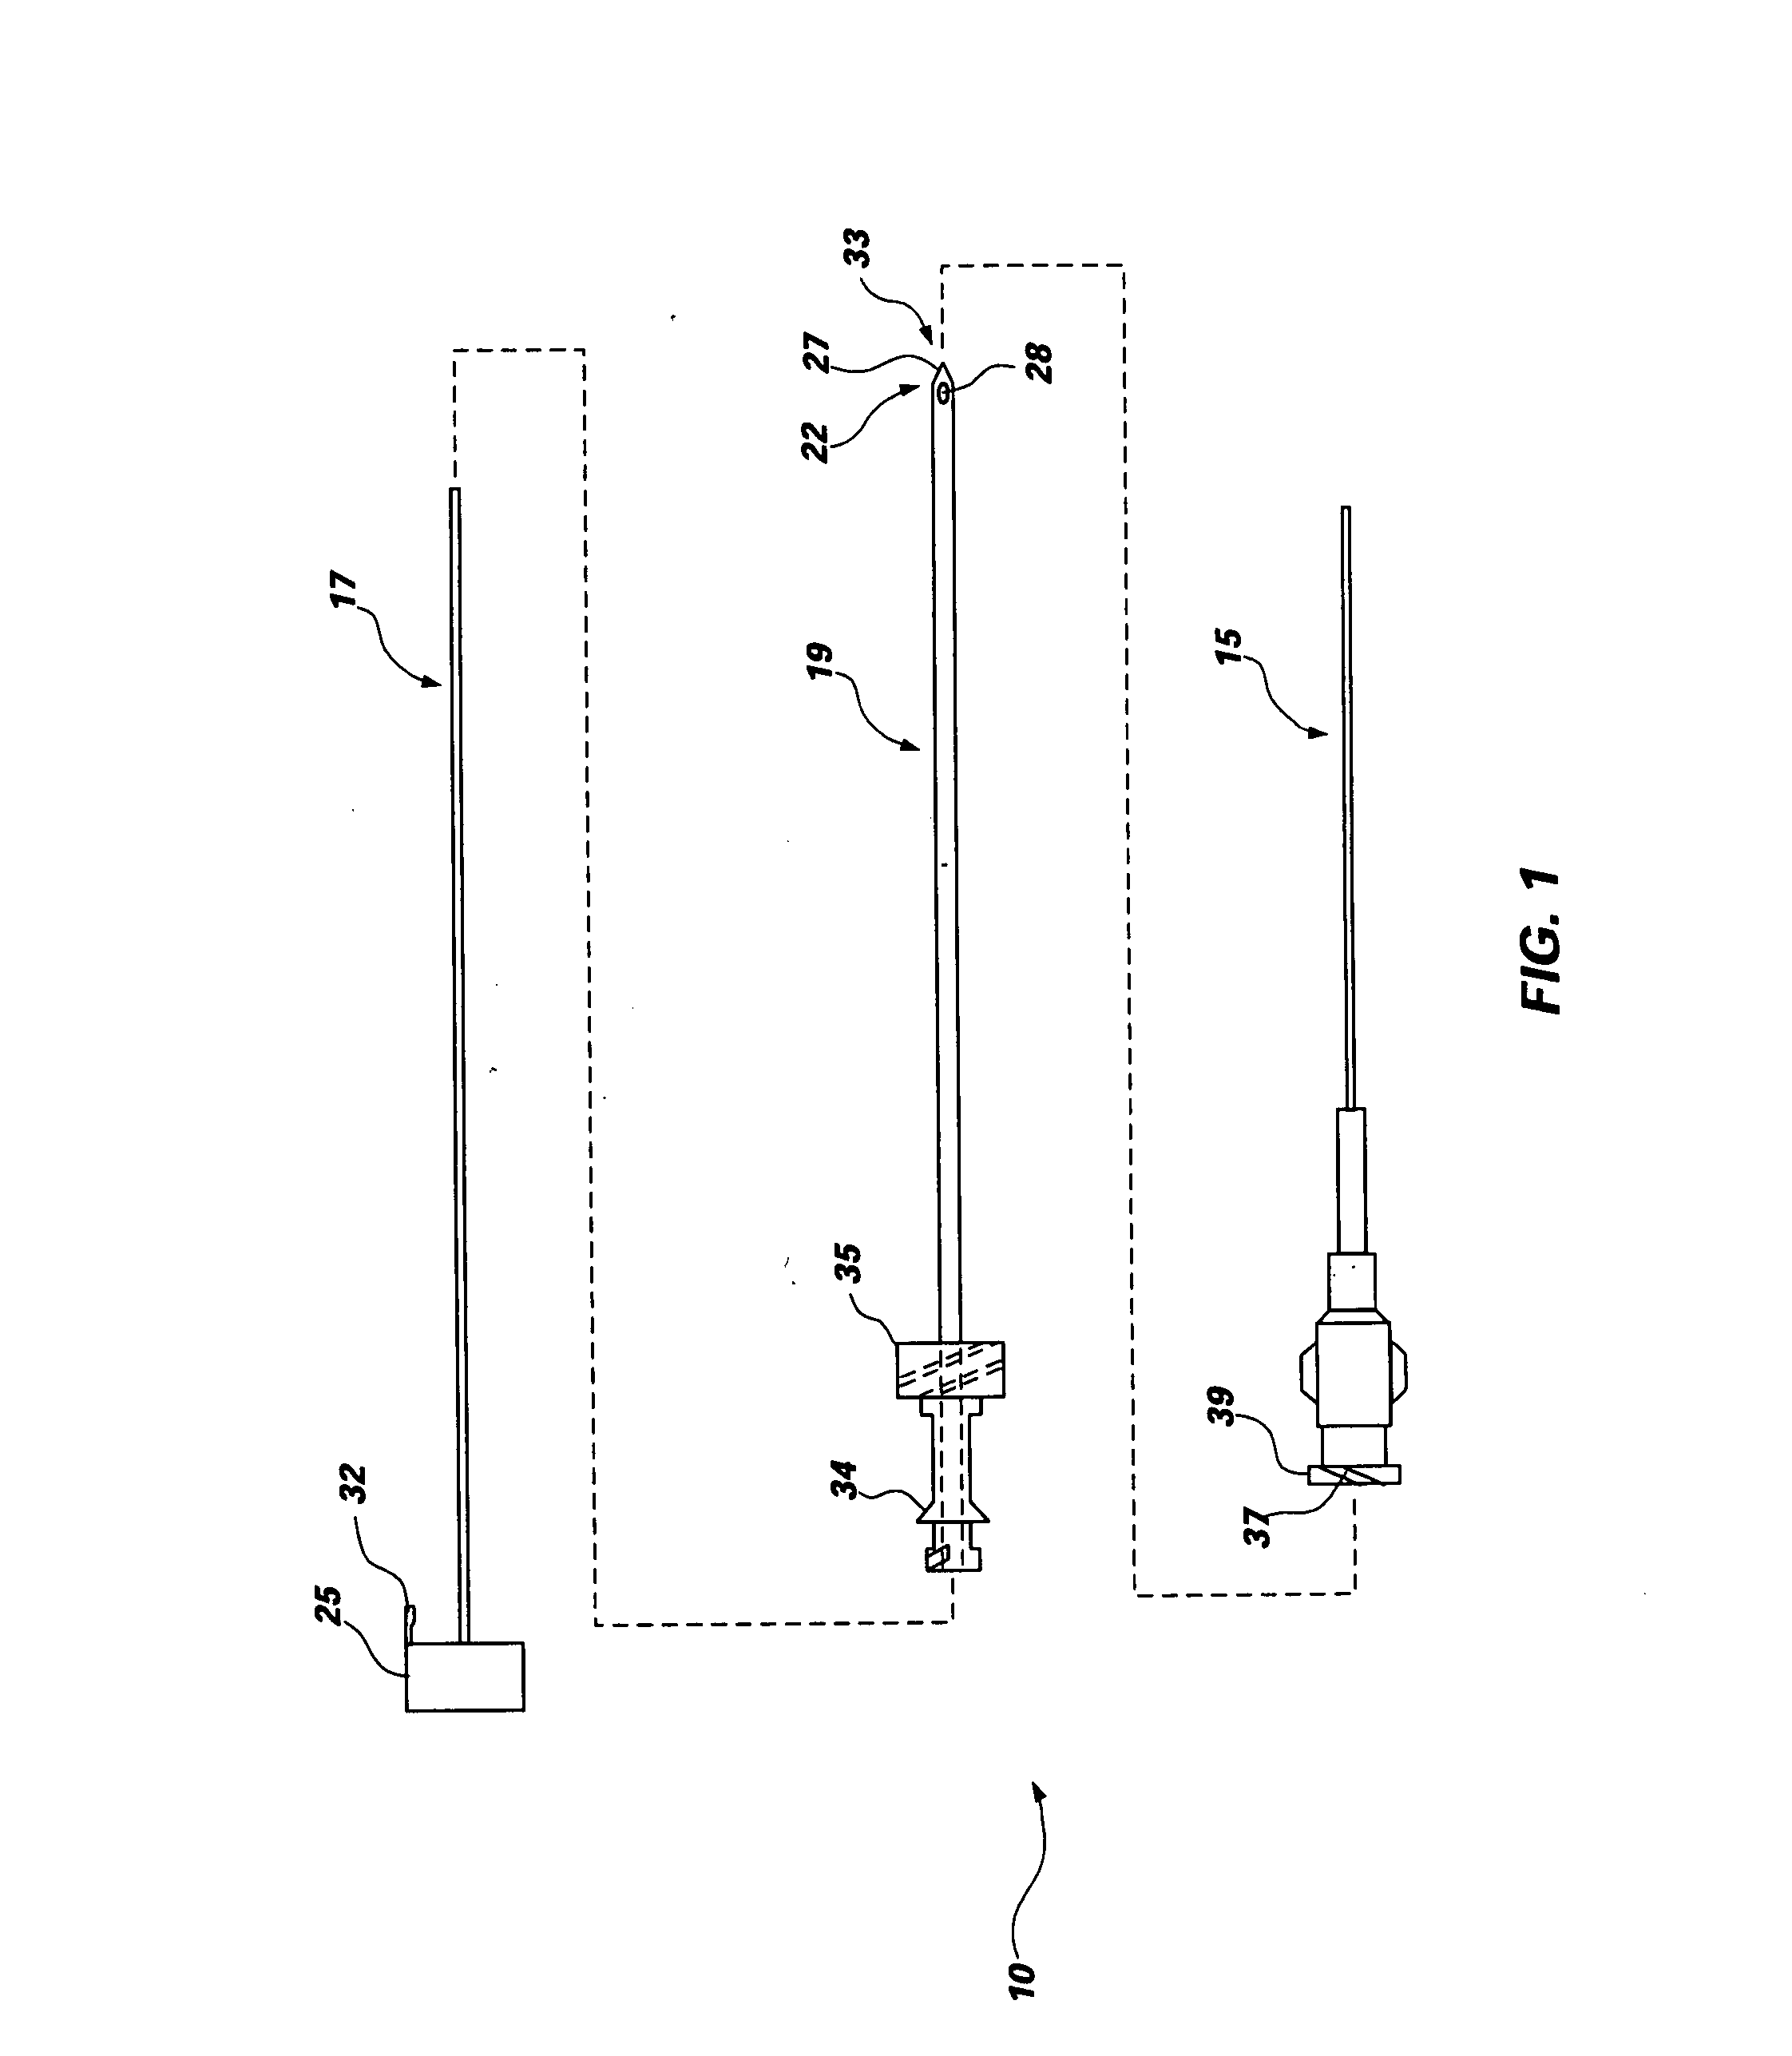 Method of using flexible spinal needle assemblies